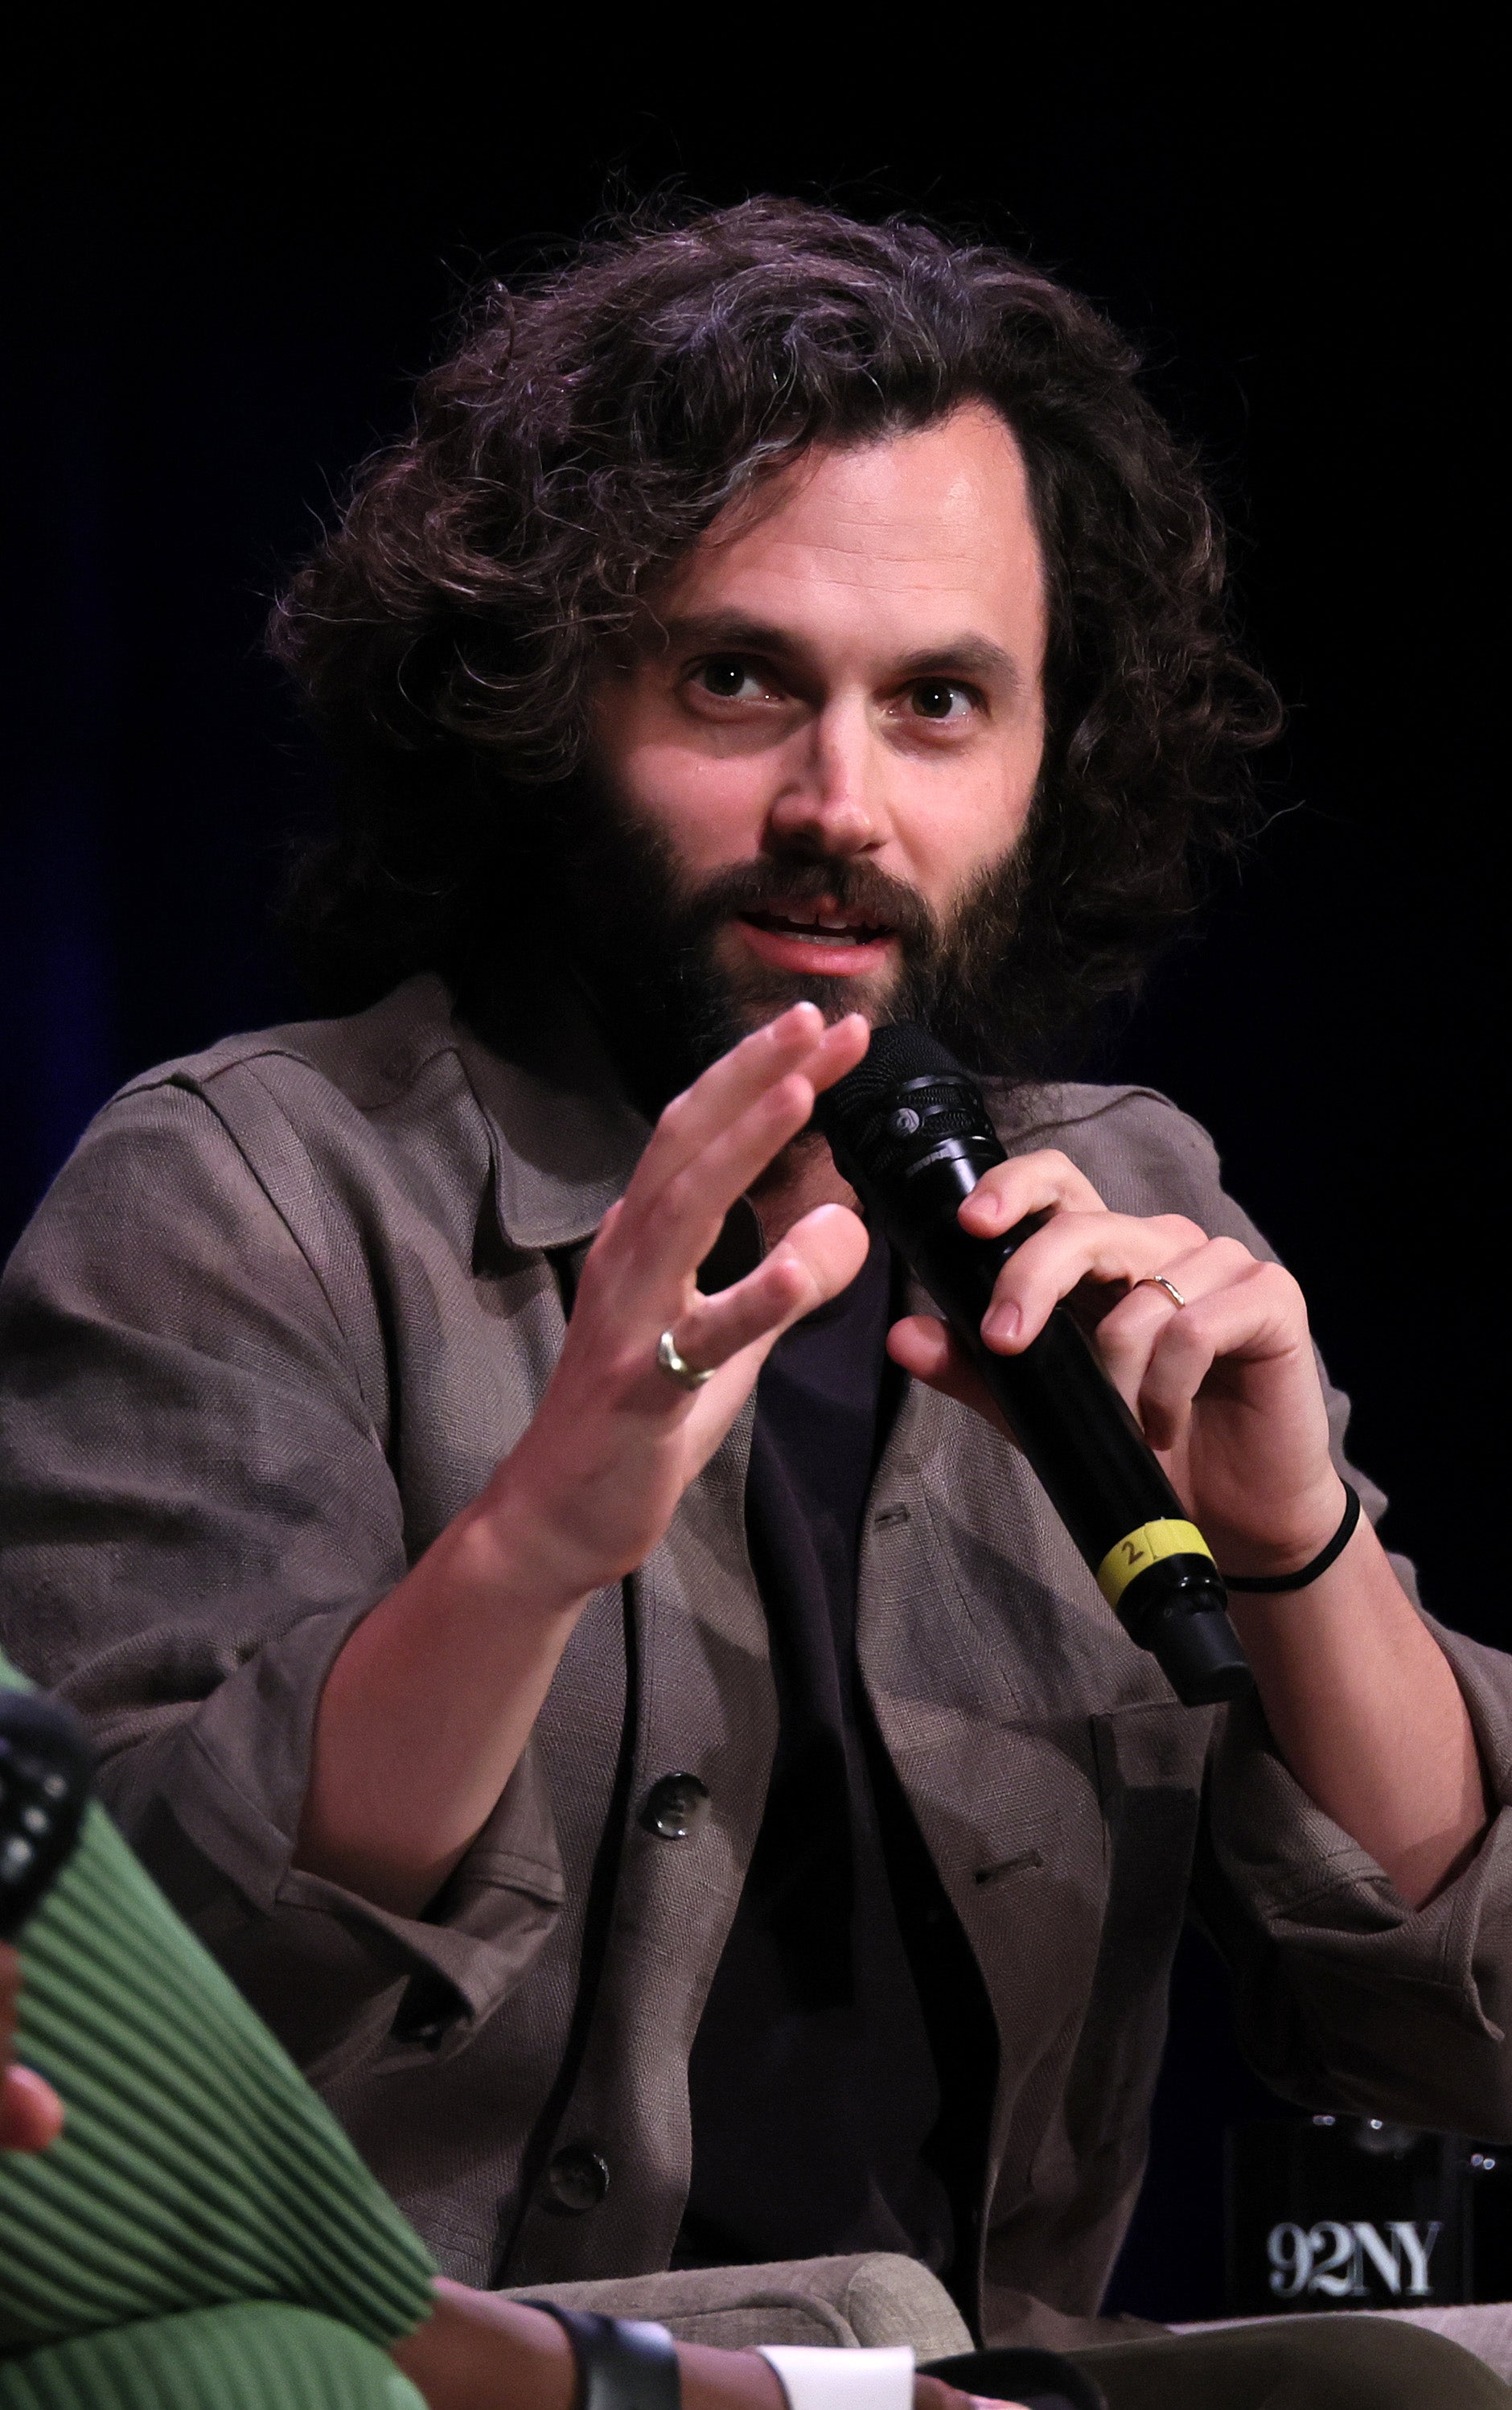 Penn speaking into a microphone, gesturing with his hands, wearing a casual jacket